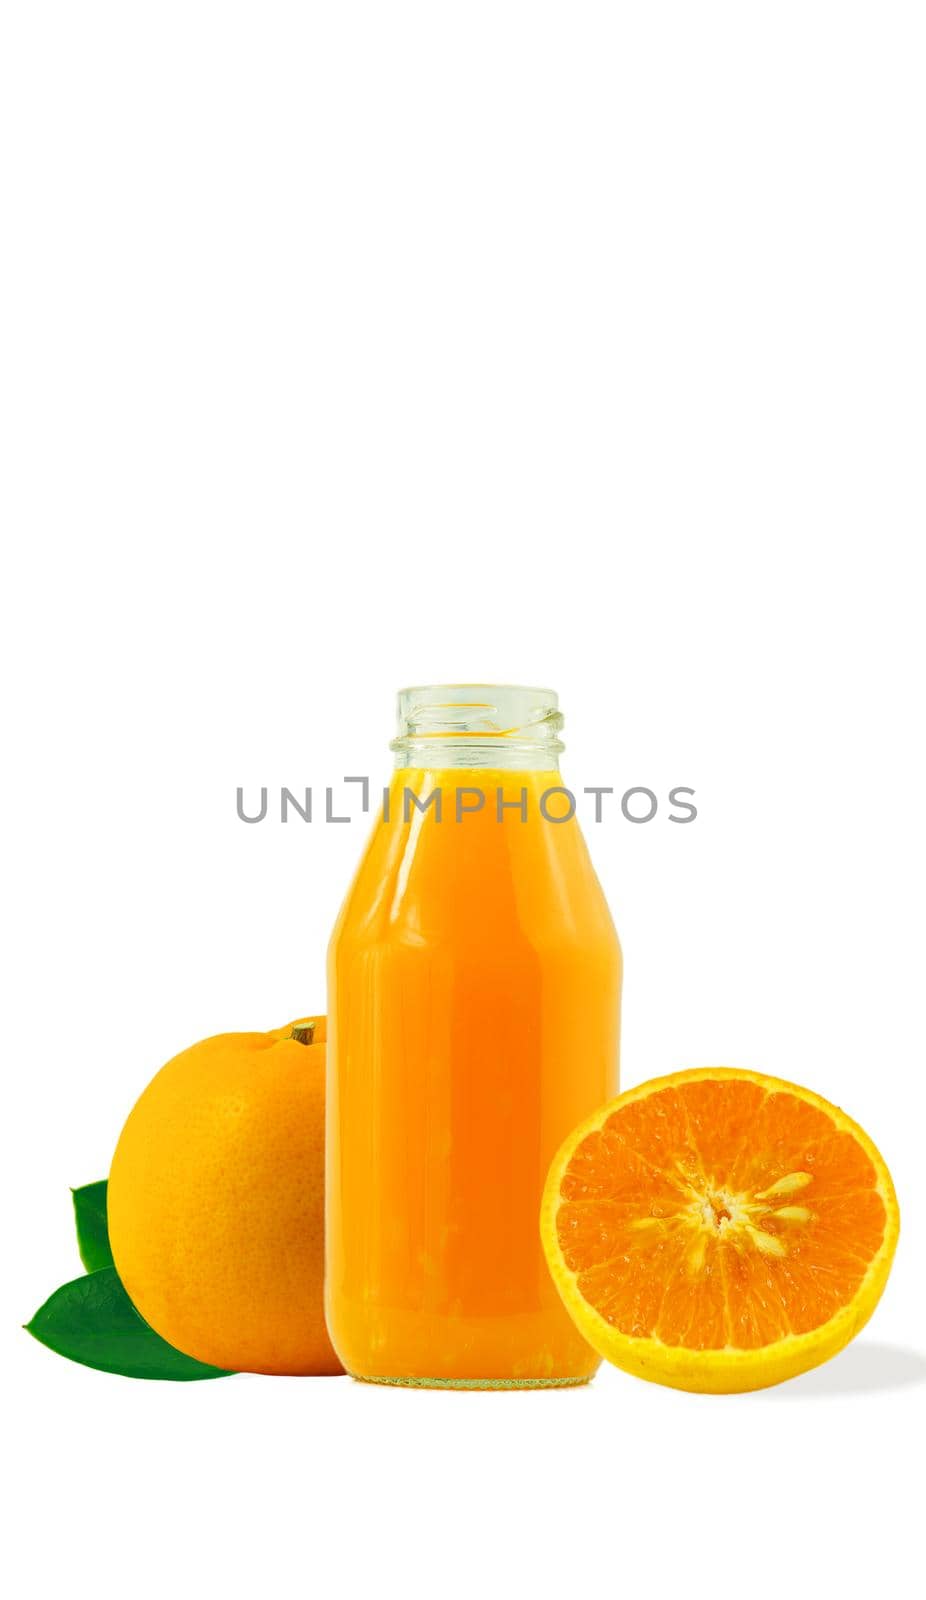 100% fresh-squeezed orange juice in a glass bottle And citrus fruit split on white background. Concept of how to live with a naturally refreshing drink that contains vitamin C